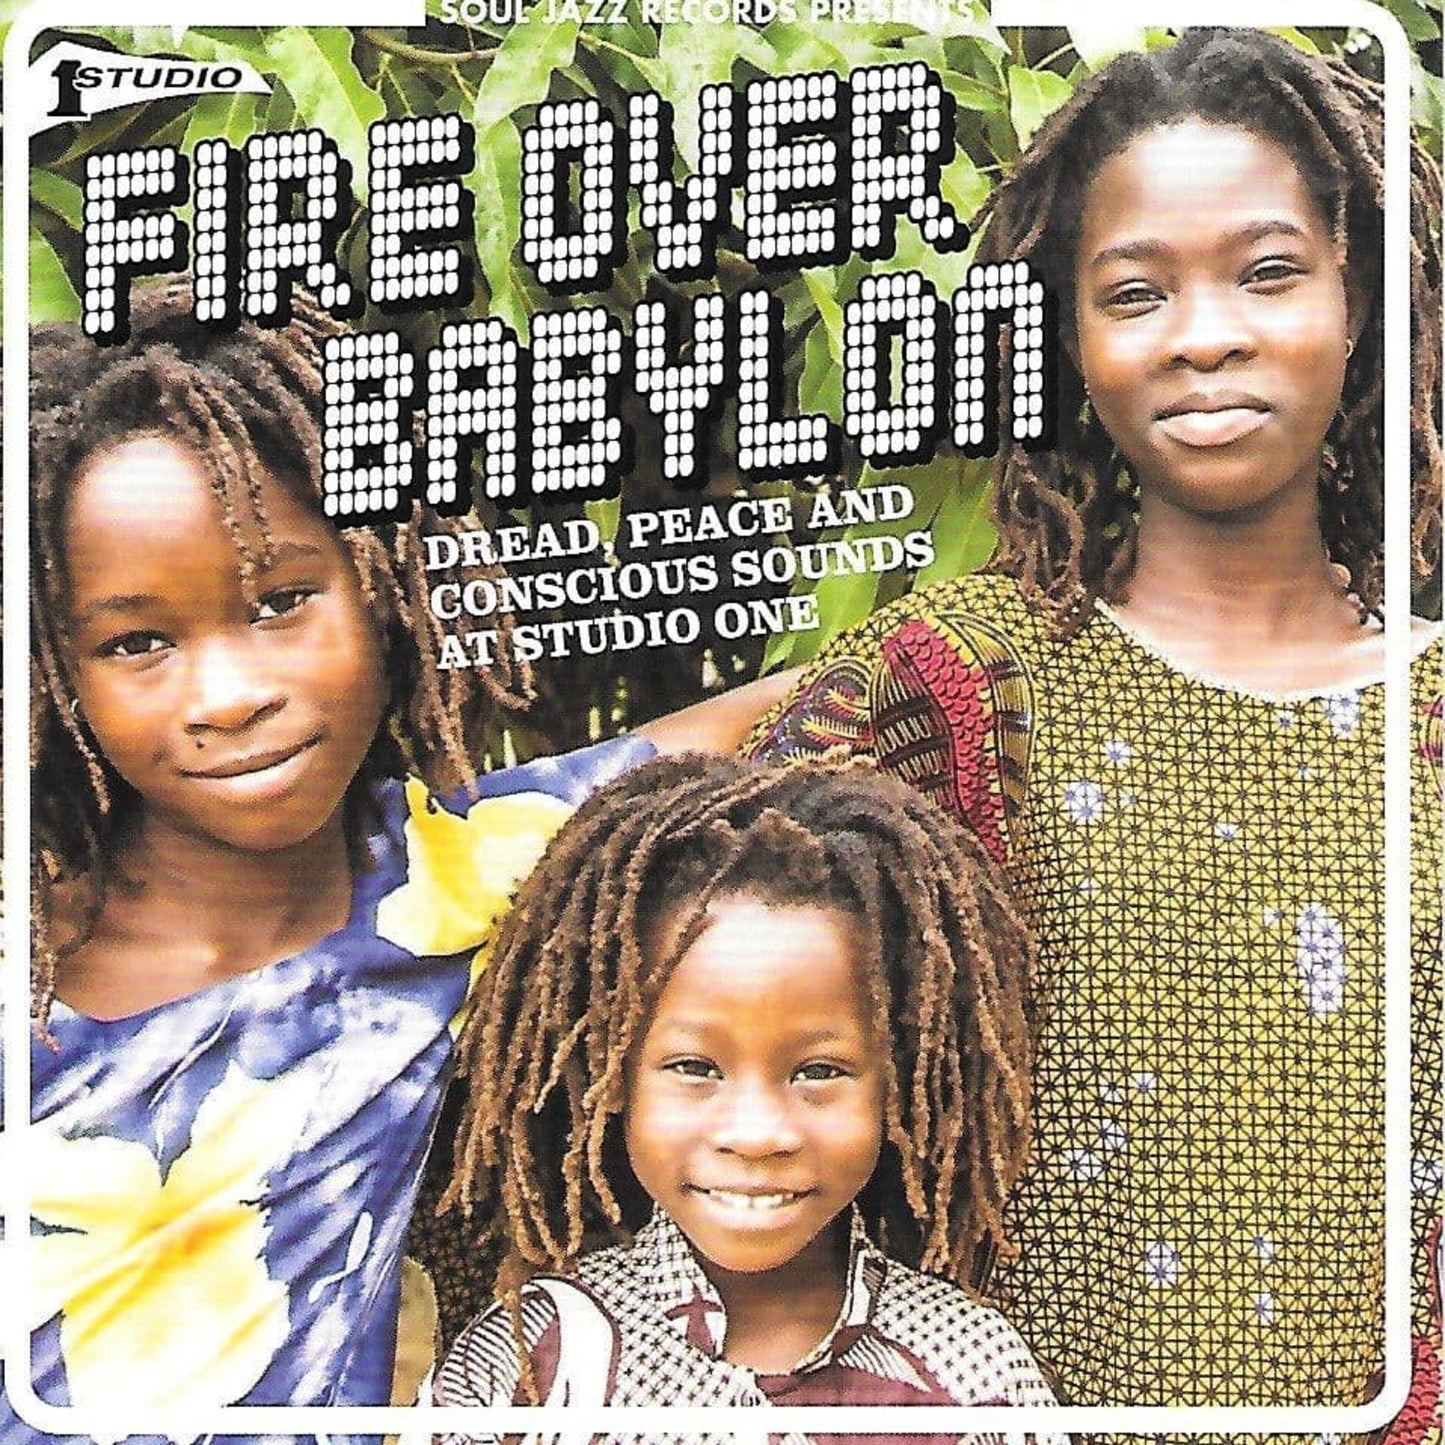 Studio One - Fire Over Babylon (Dread, Peace And Conscious Sounds At Studio One)